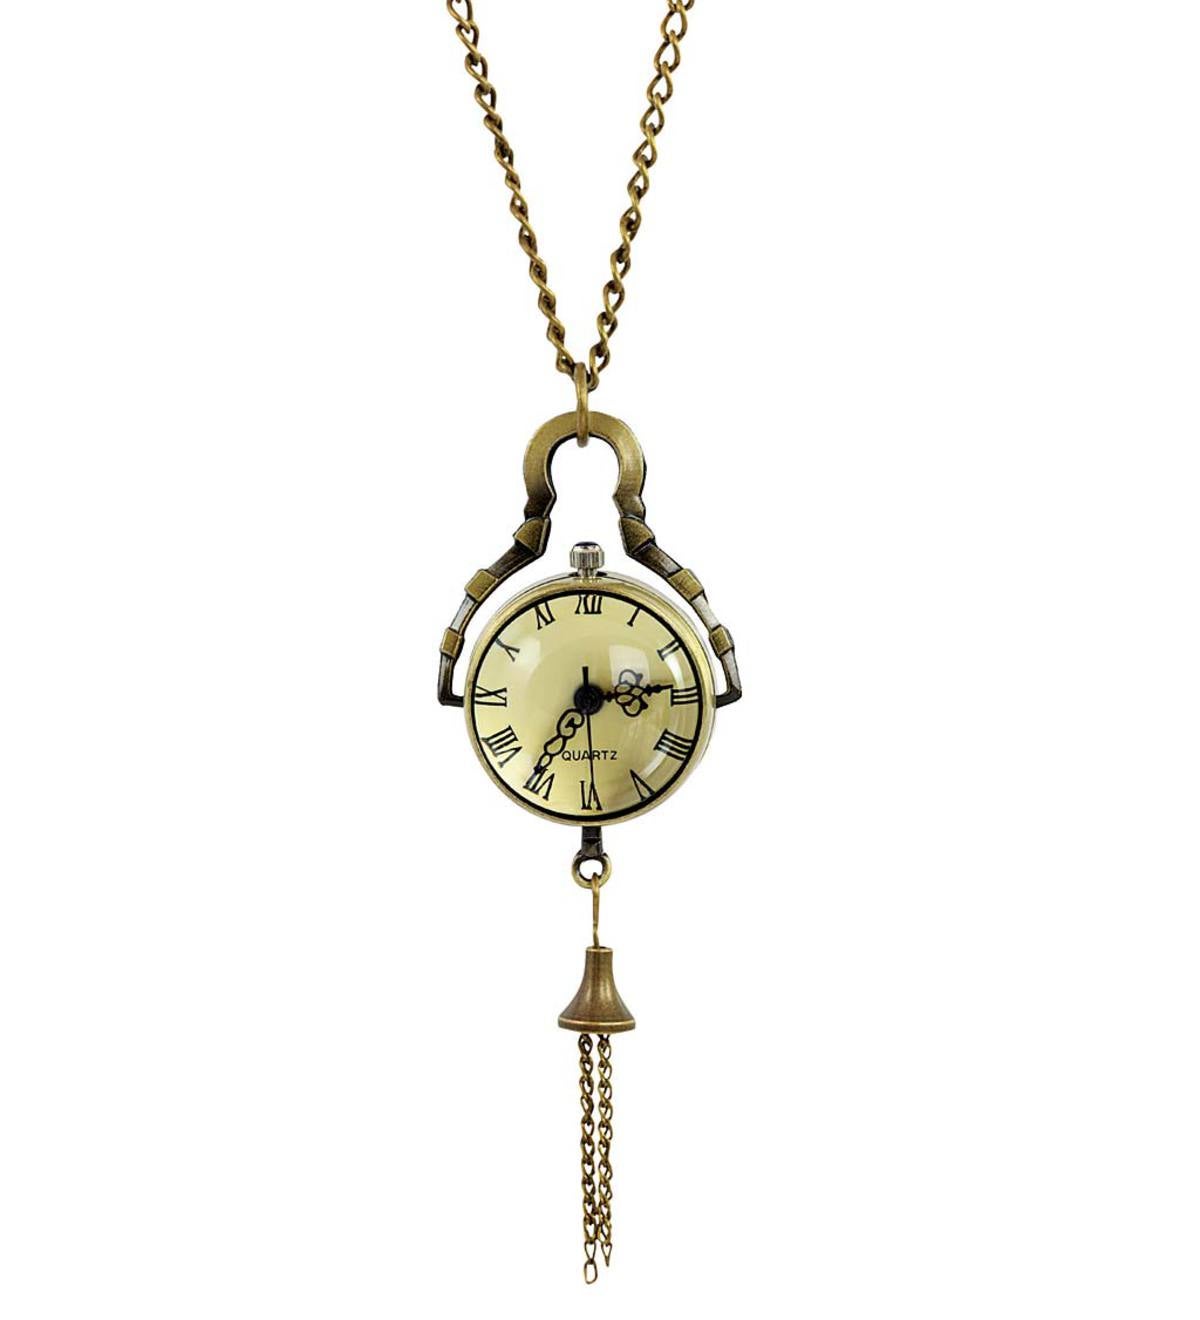 Glass Ball Watch Necklace